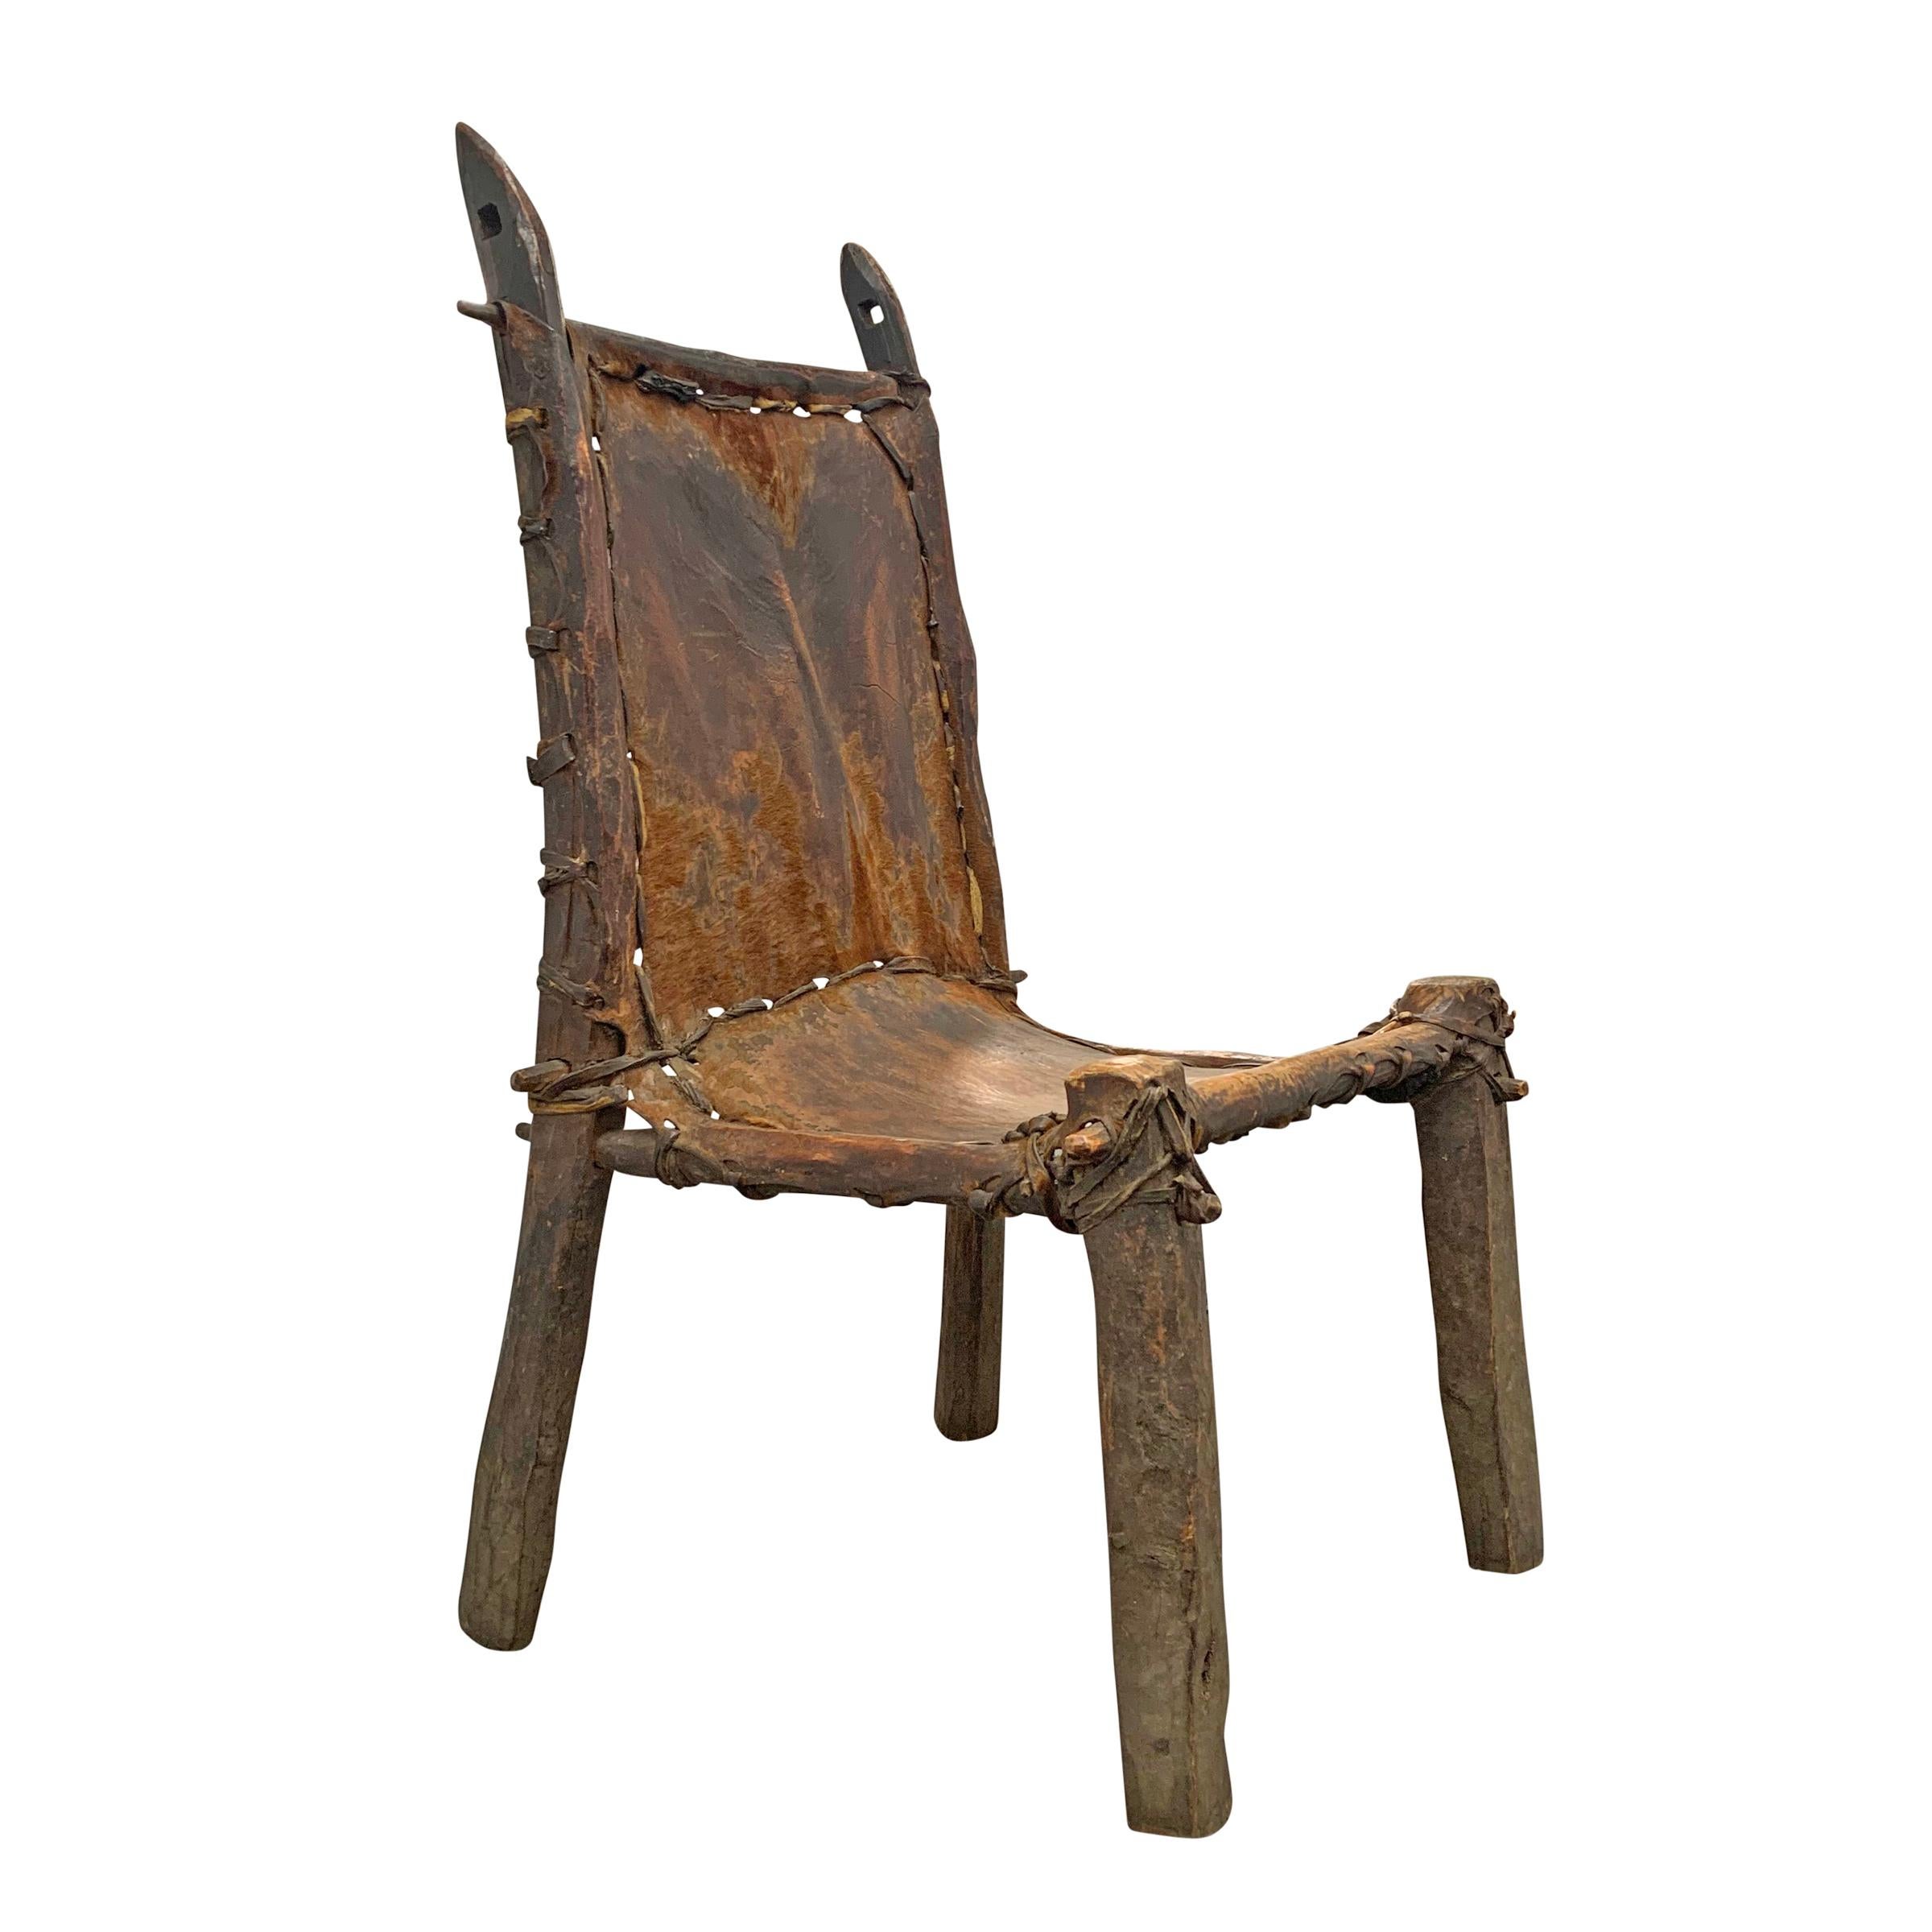 A wonderfully sculptural early 20th century Ethiopian side chair with a hide seat and back stitched with hide strips, and stretched over a primitive wood frame. Chair is functional, but it is more sculptural object than comfortable perch.